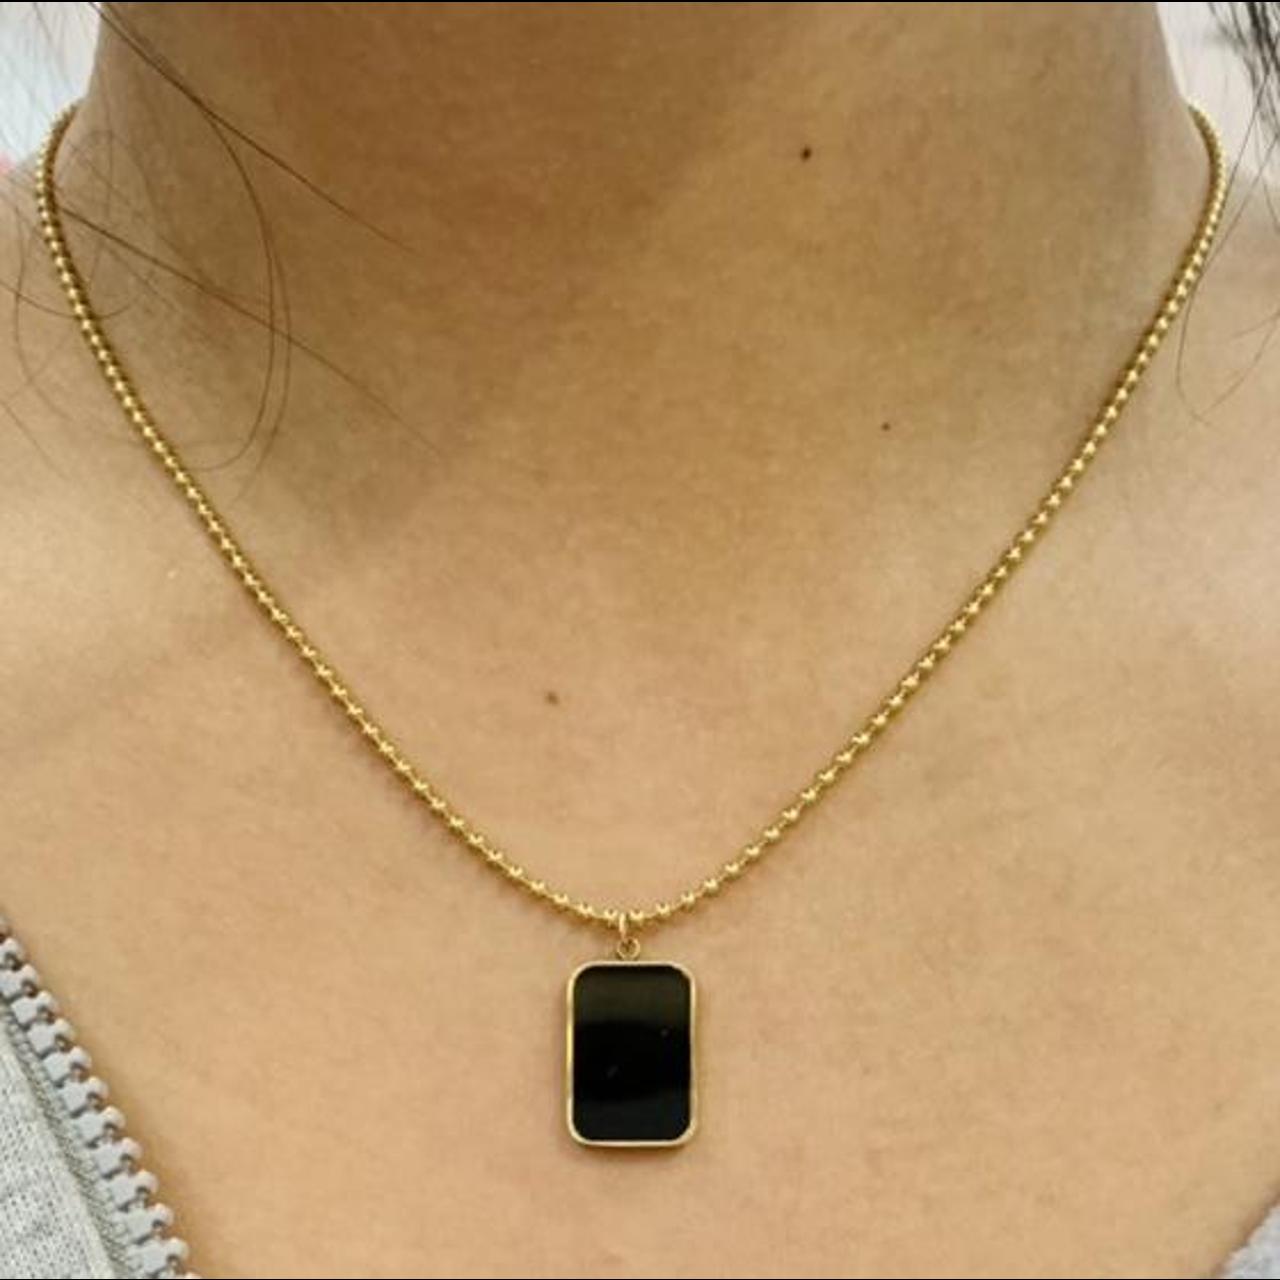 Product Image 1 - Gold Black Pendant Necklace 

-Stainless